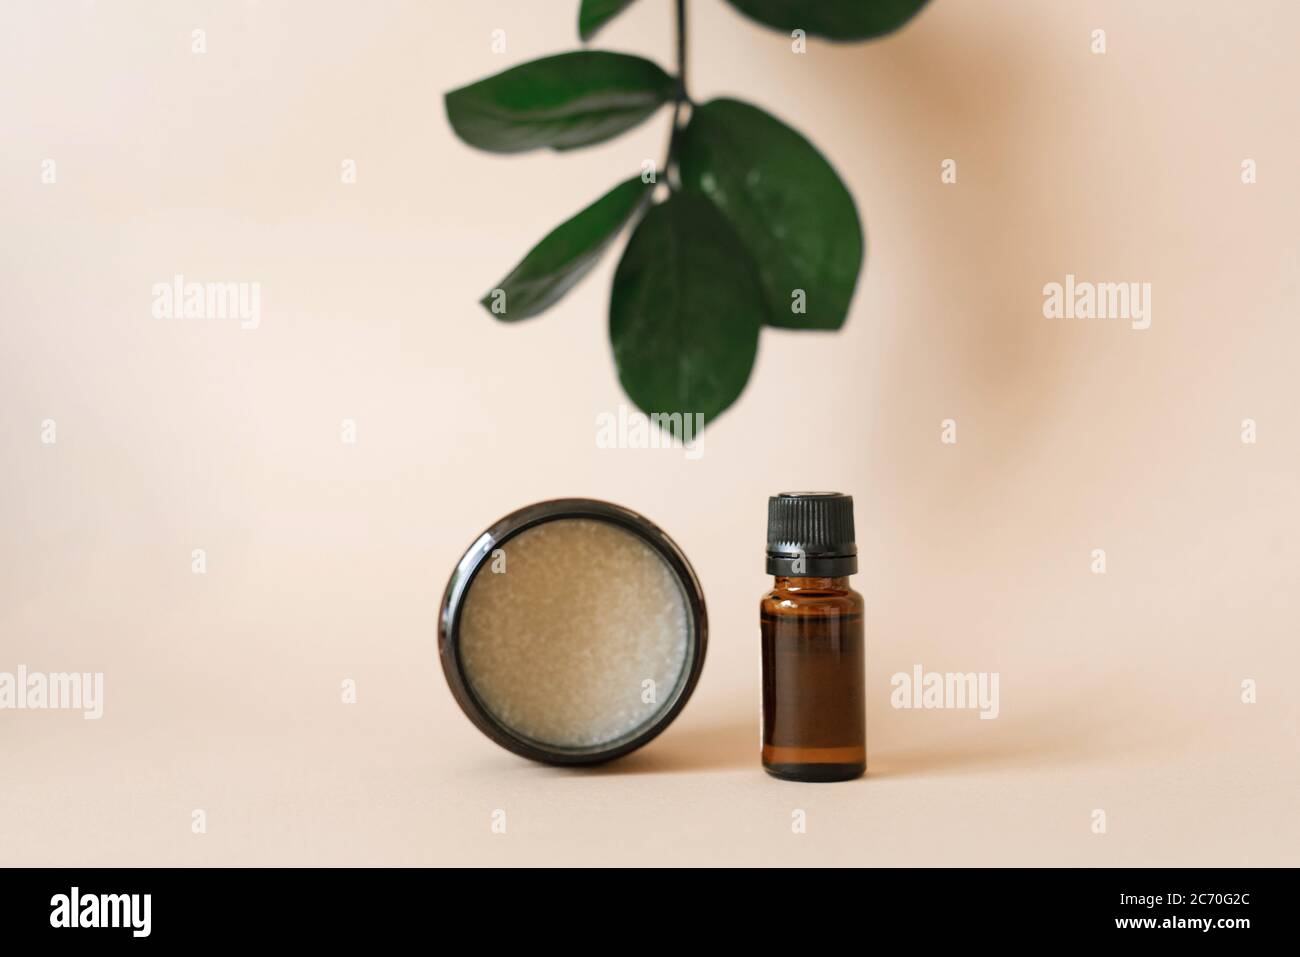 Vegetable cosmetics for body care in beauty salons. Bottle and jar with oils on a beige background with leaves of green zamiokulkas Stock Photo